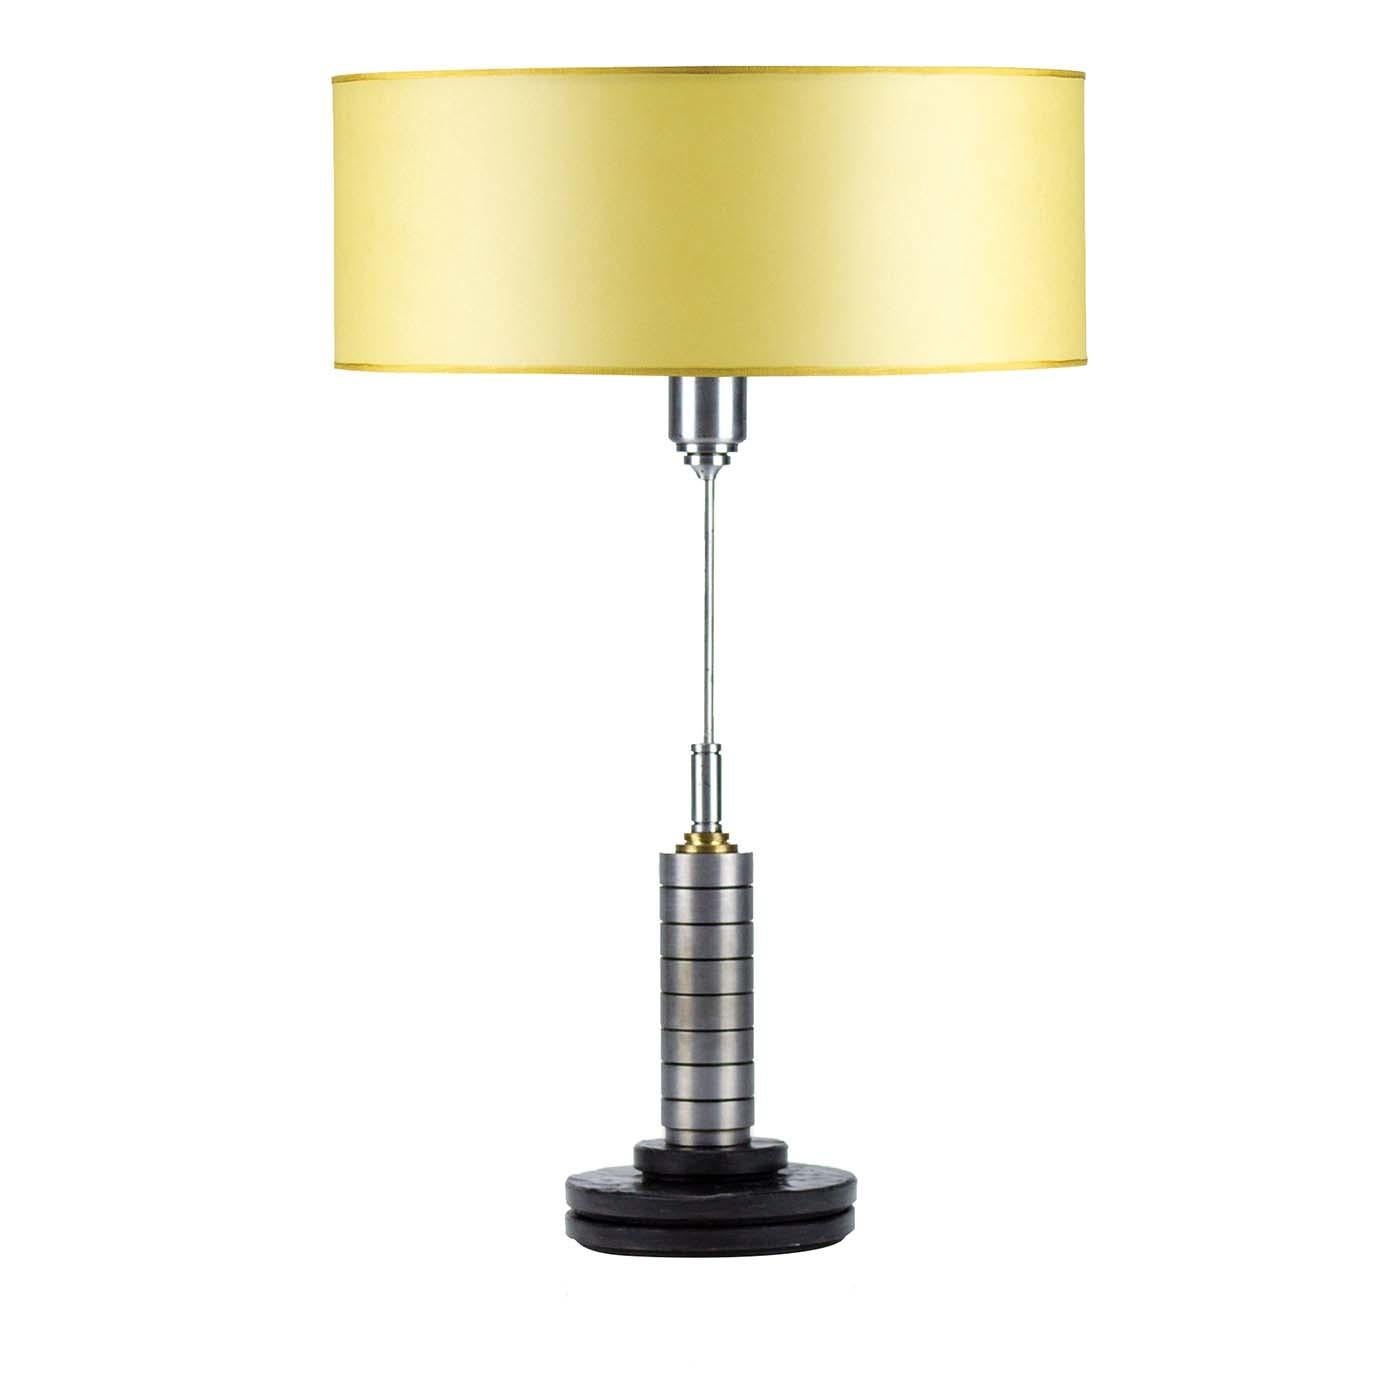 With its sleek and modern profile, this elegant table lamp will elevate the style of any interior, diffusing a perfect ambient light on a console in the entryway or on a side table in the living room. Supported by a polished round base of matrix